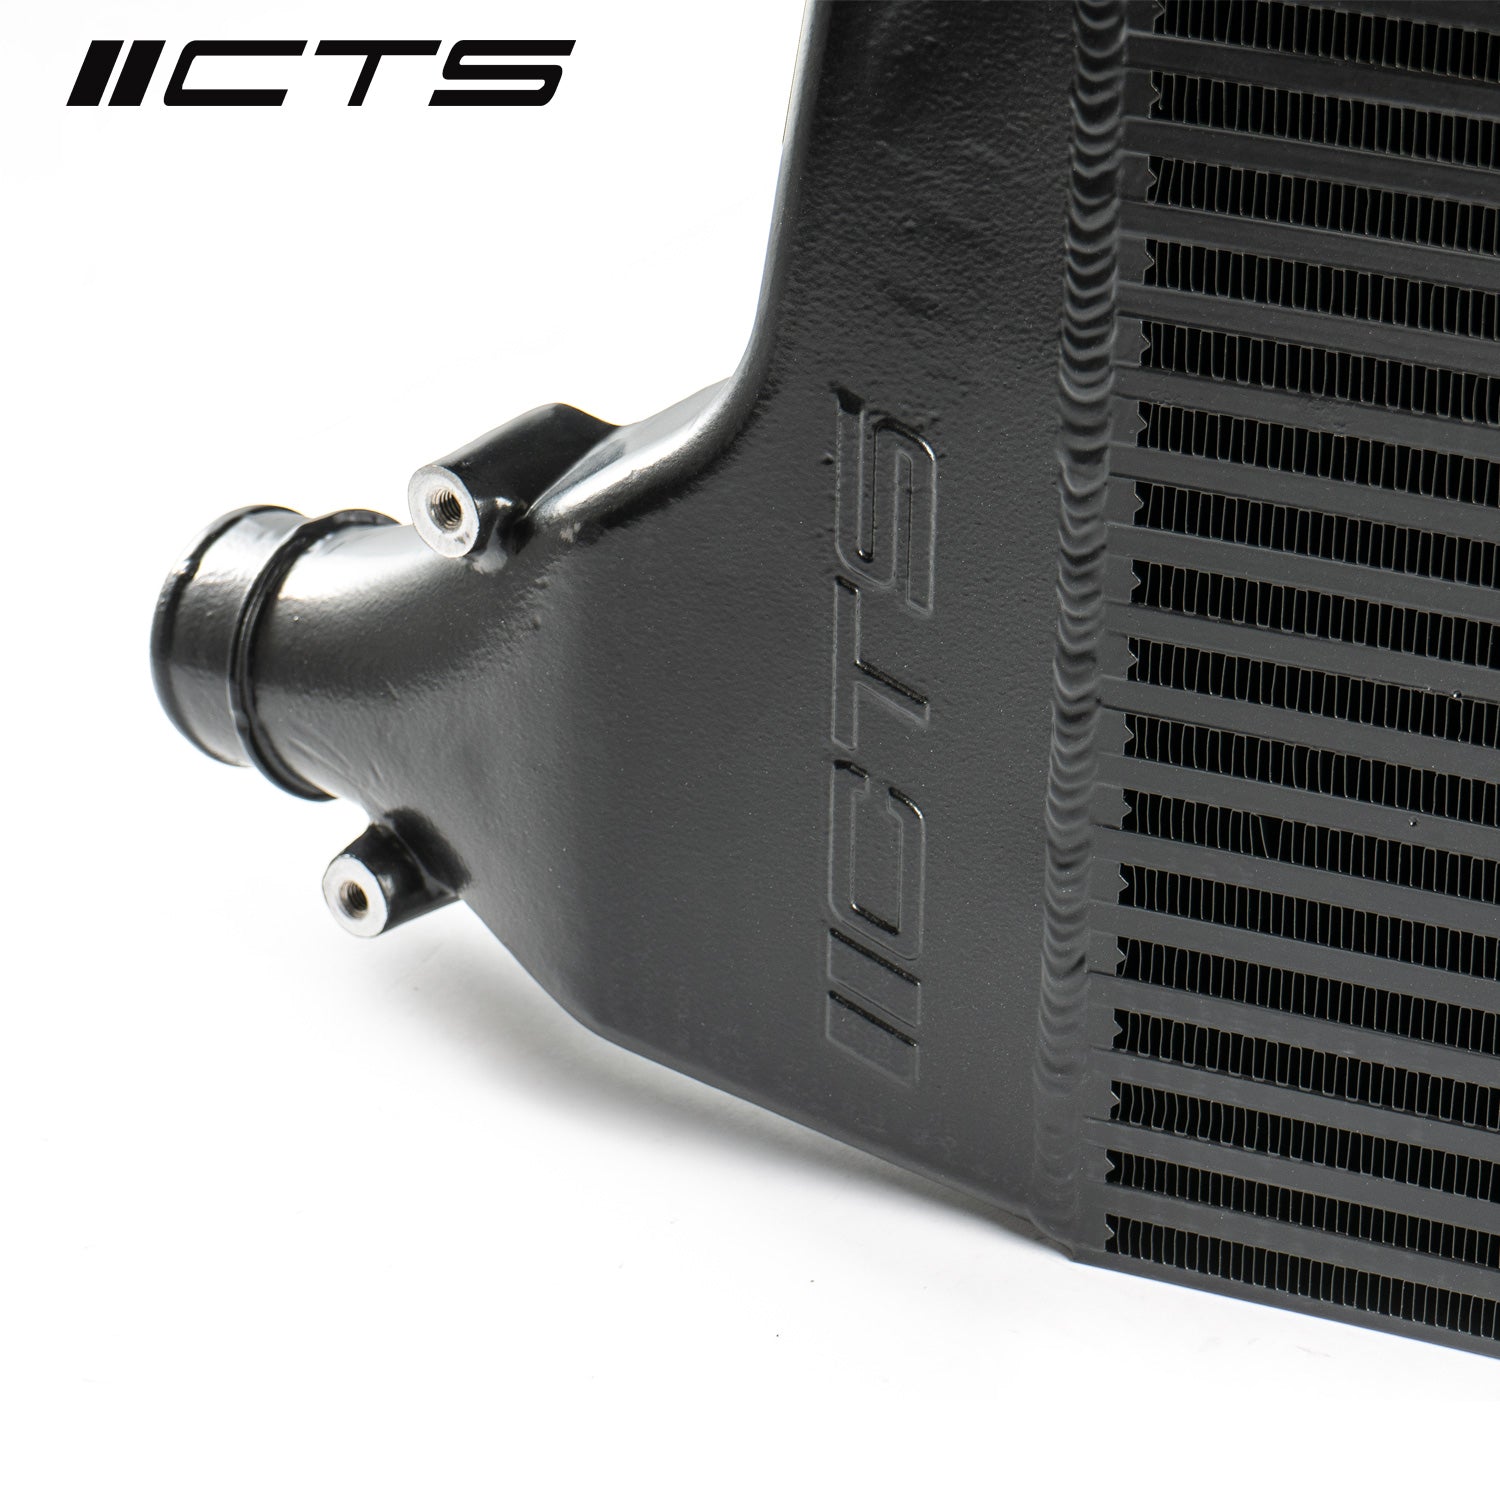 CTS TURBO B9 AUDI A4, A5, ALLROAD 1.8T/2.0T AND B9 AUDI S4, S5 3.0T UPGRADED INTERCOOLER (DIRECT FIT)